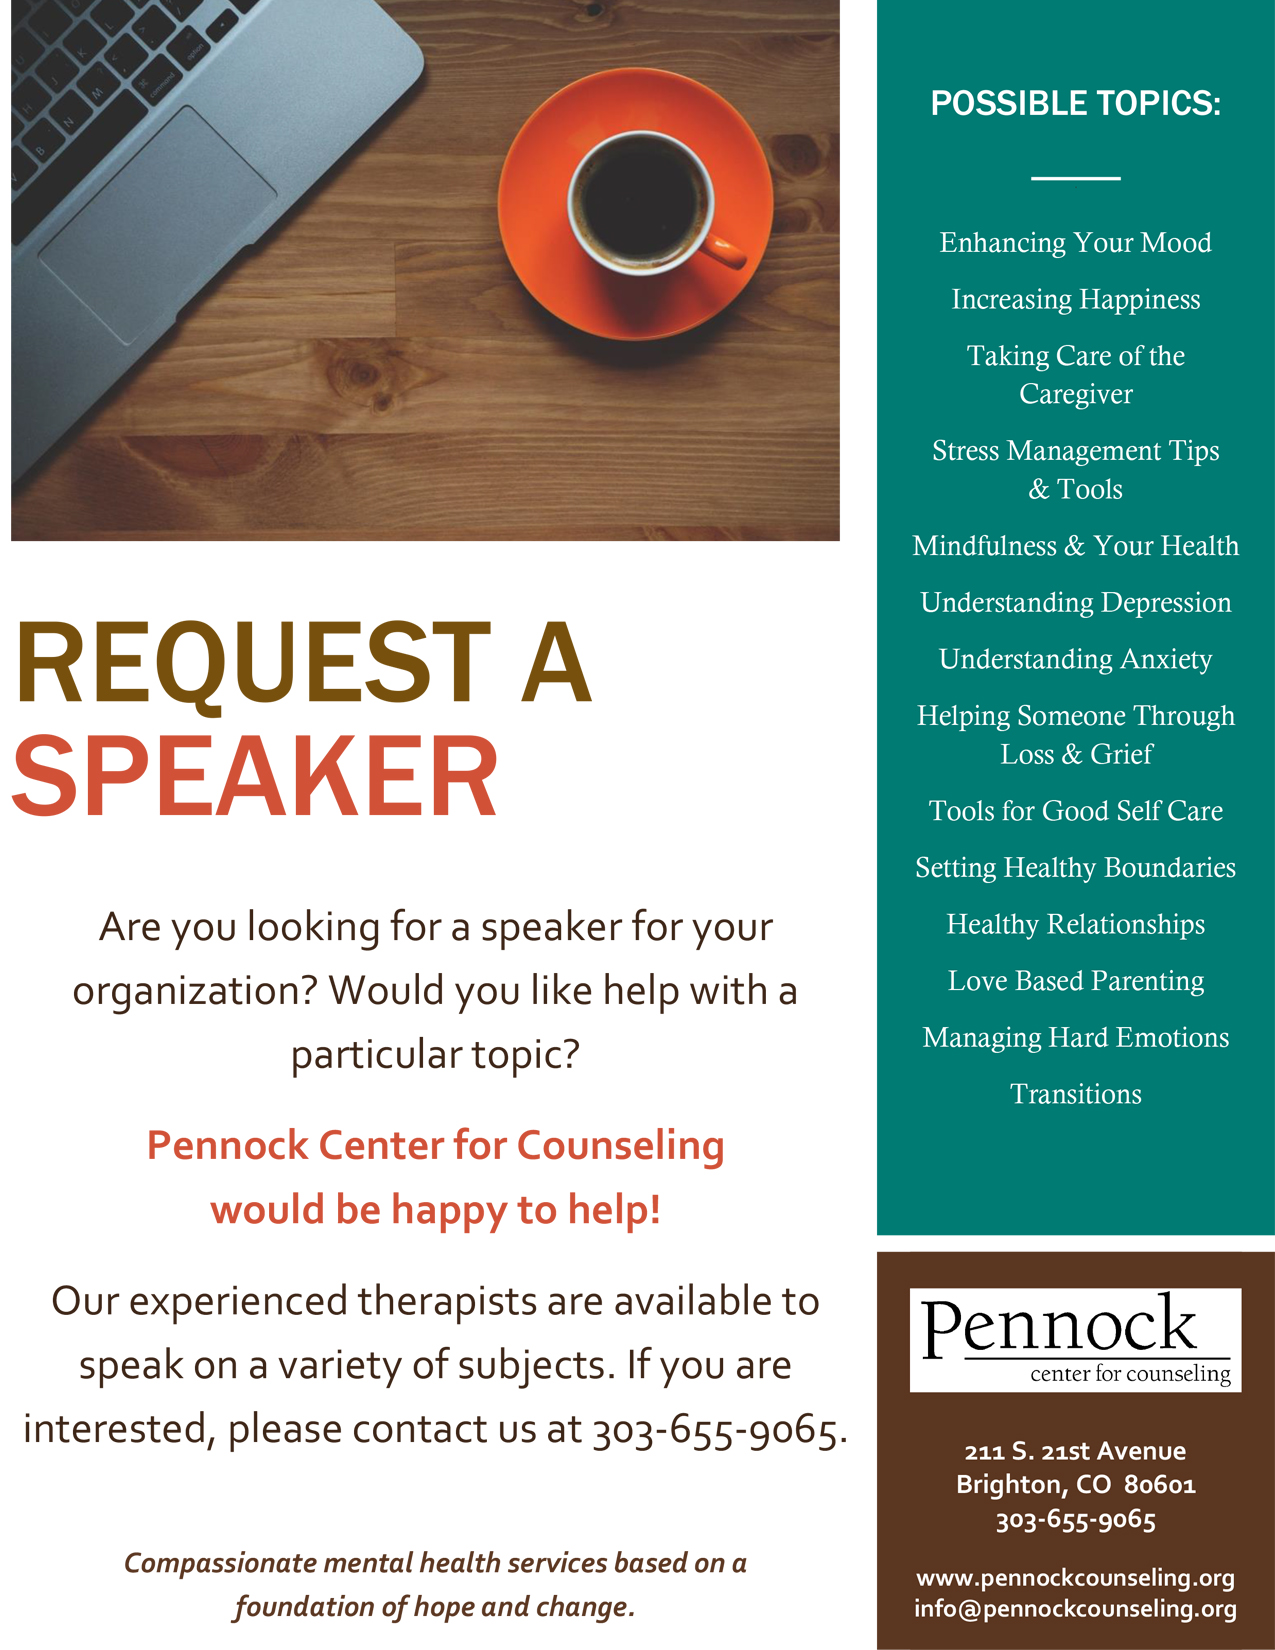 image of request a speaker flyer